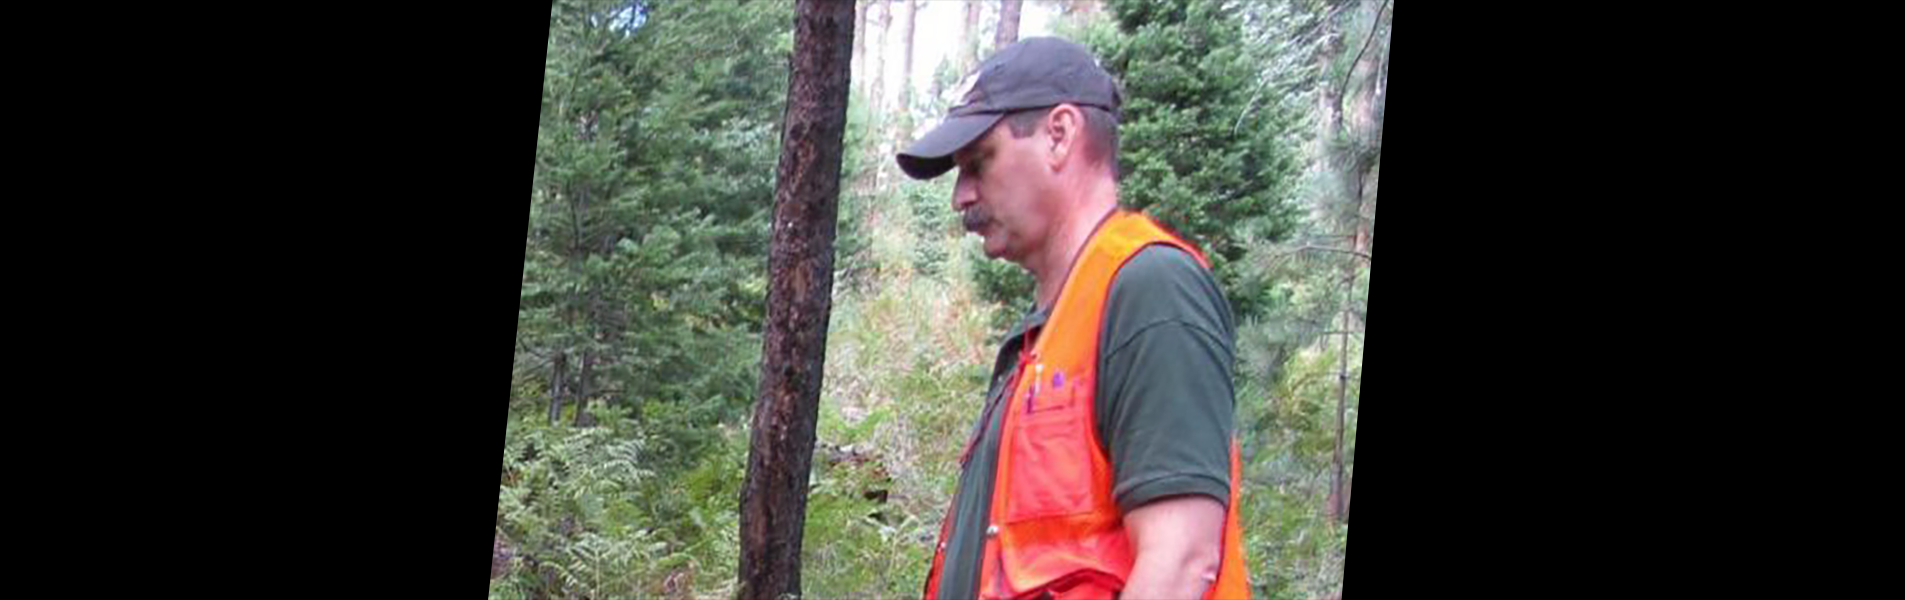 Tim Robards, President of TYLD Corp, walking in the forest.